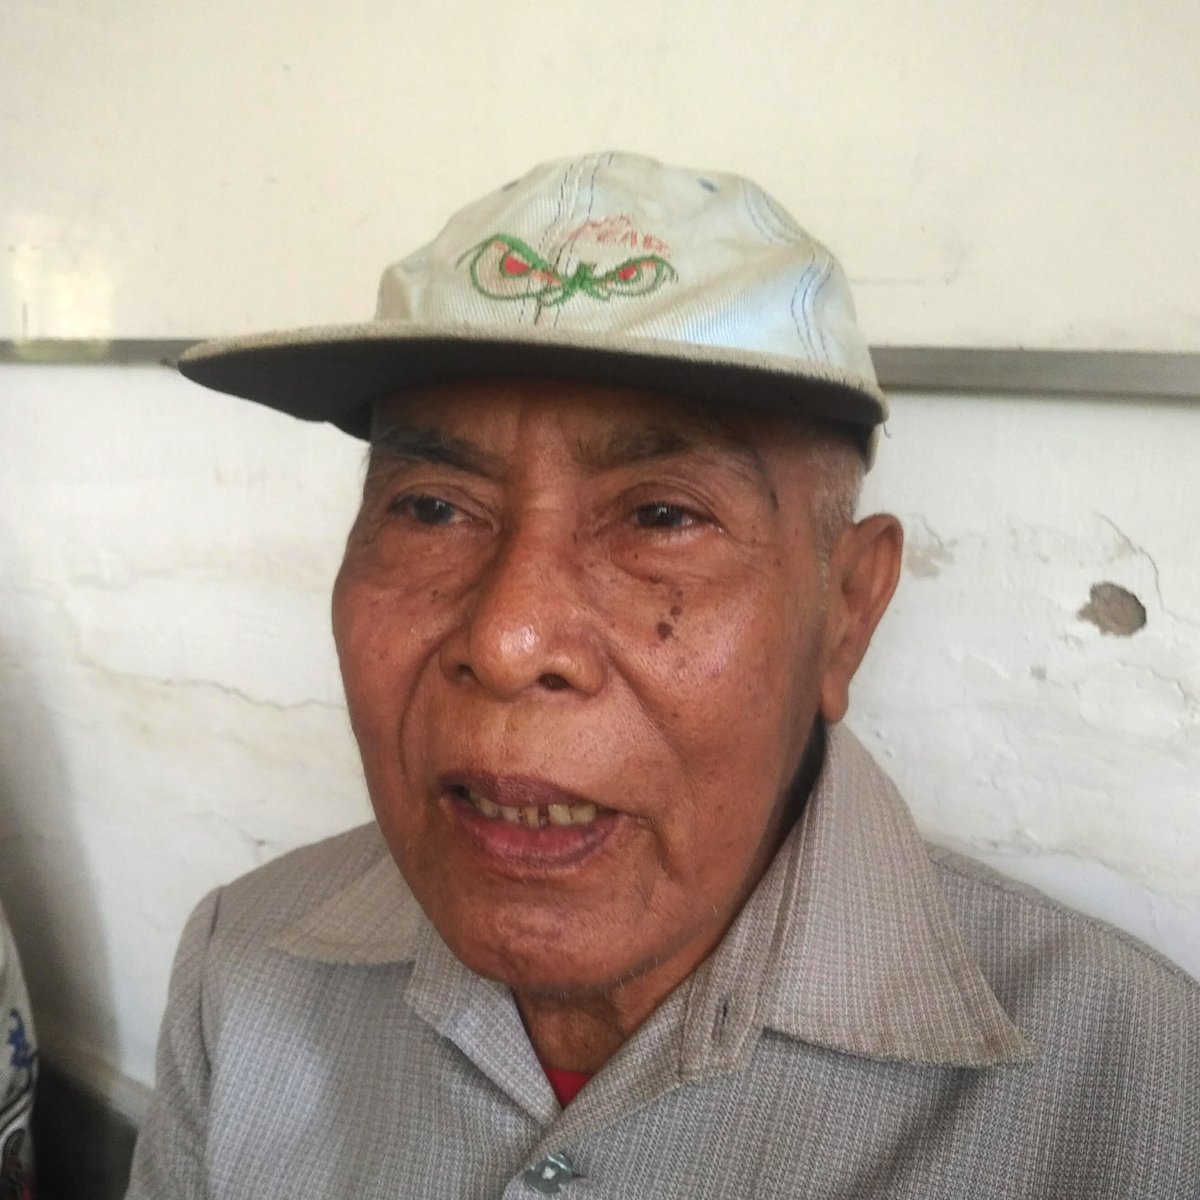 And here is Hariyono Sugiyono Raharjo, who survived one of the most brutal right-wing dictatorships in history. Yes, he is wearing a "No Fear" hat